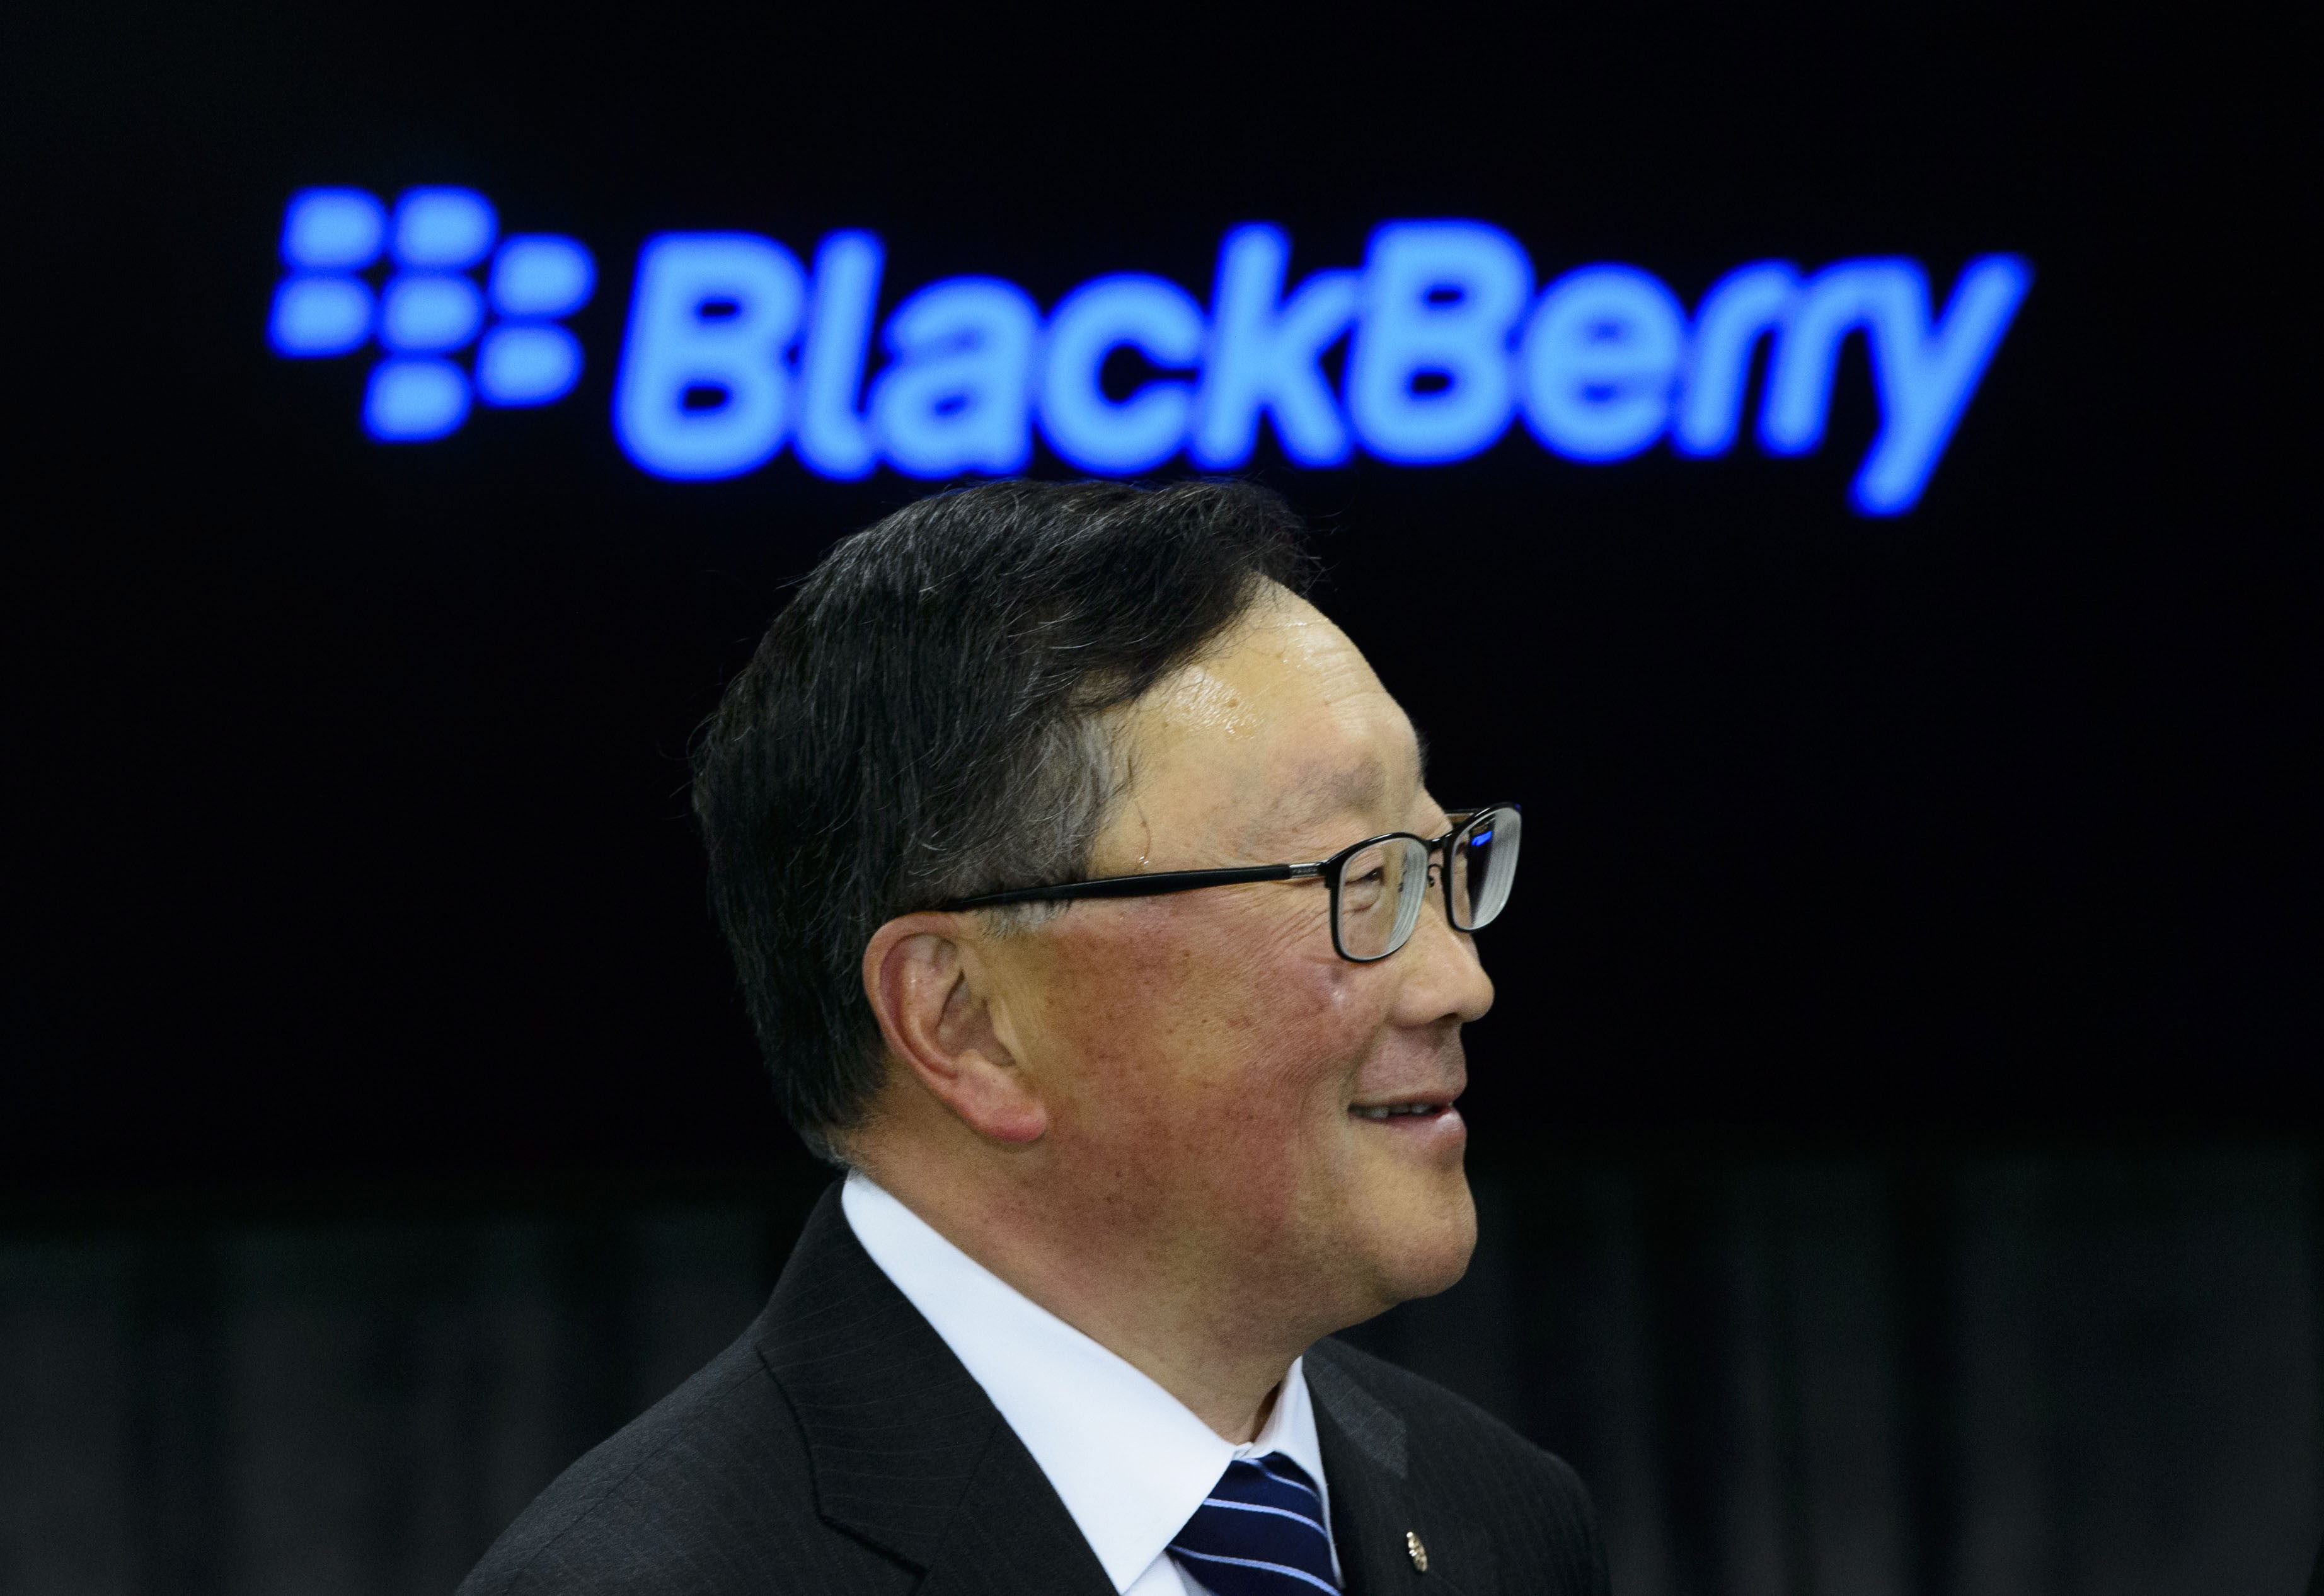 BlackBerry’s John Chen will depart as CEO amid plans to split business